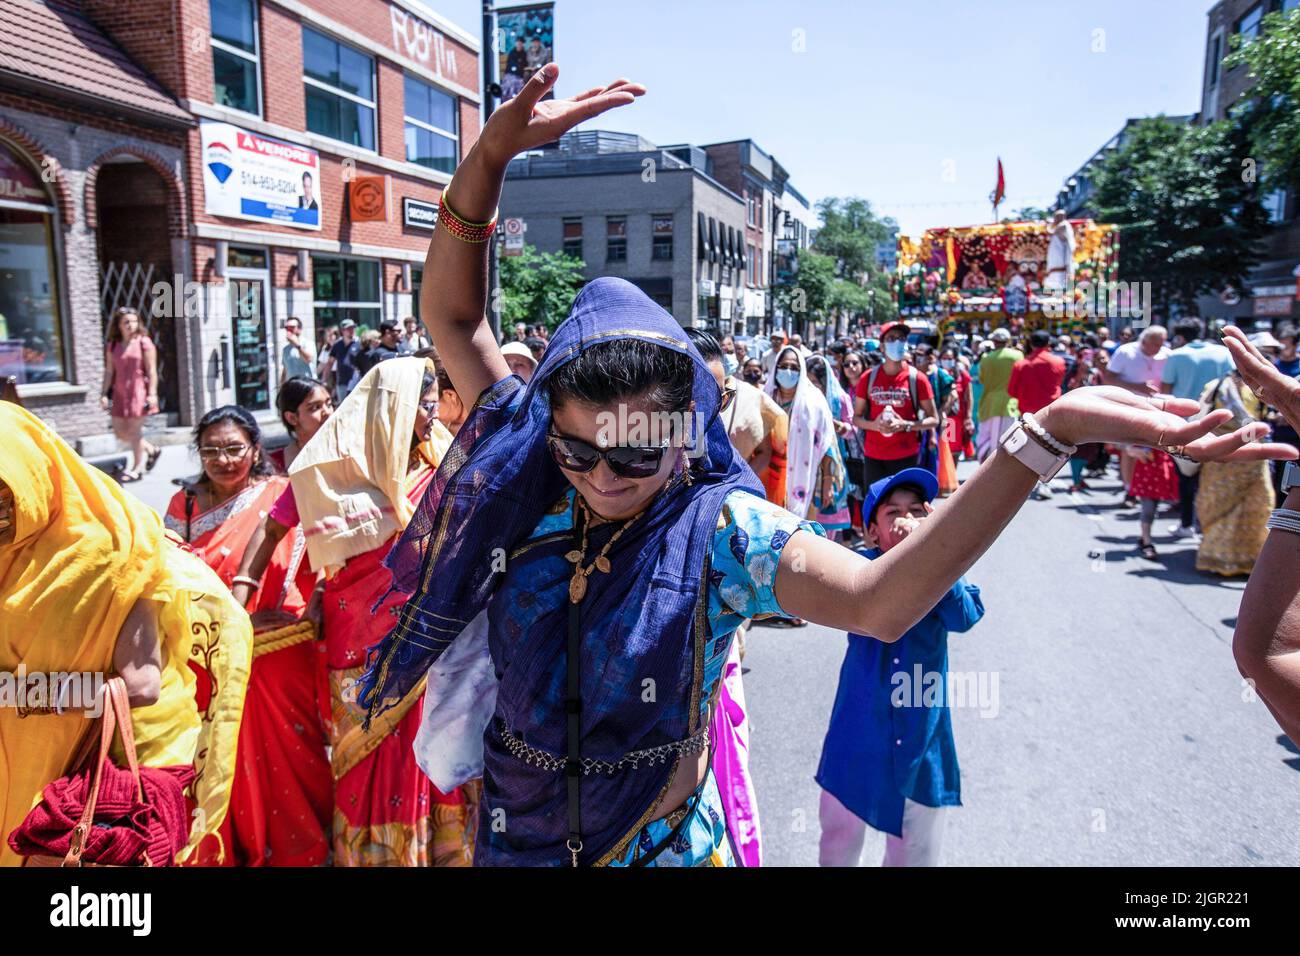 A devotee dances during the celebration. Montrealers joined the Indian community for the Ratha Yatra parade, or the Hindu religious Chariot Festival in celebration of the deity Jagannath, the Lord of the Universe. The procession marched on Saint Laurent Boulevard pulling the main cart towards Jeanne Mance Park. Stock Photo